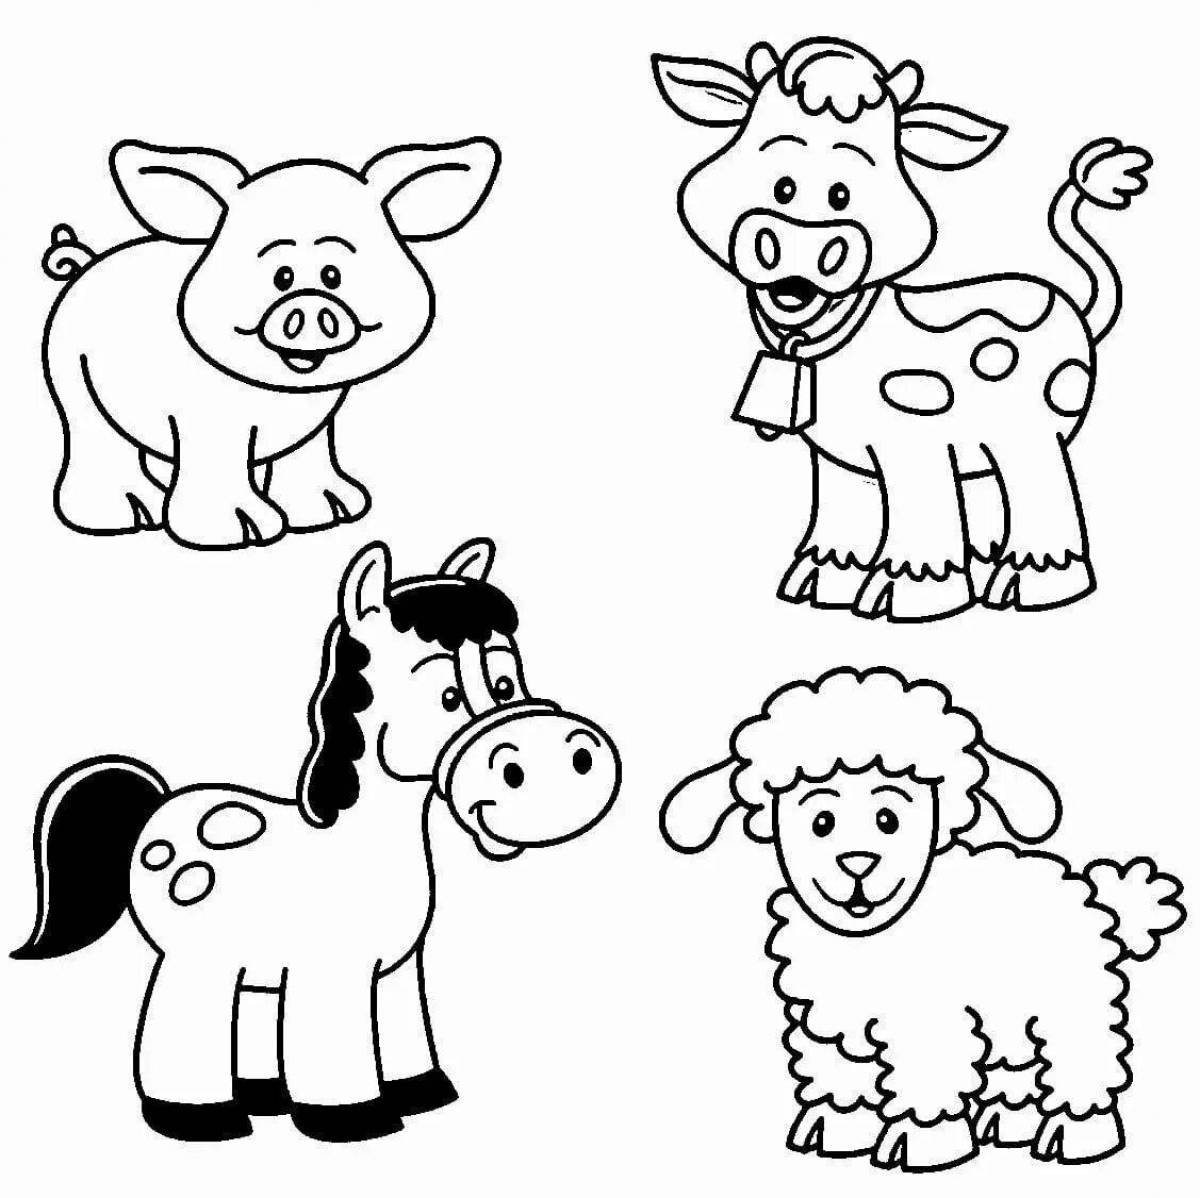 Fabulous pet coloring pages for 5-6 year olds